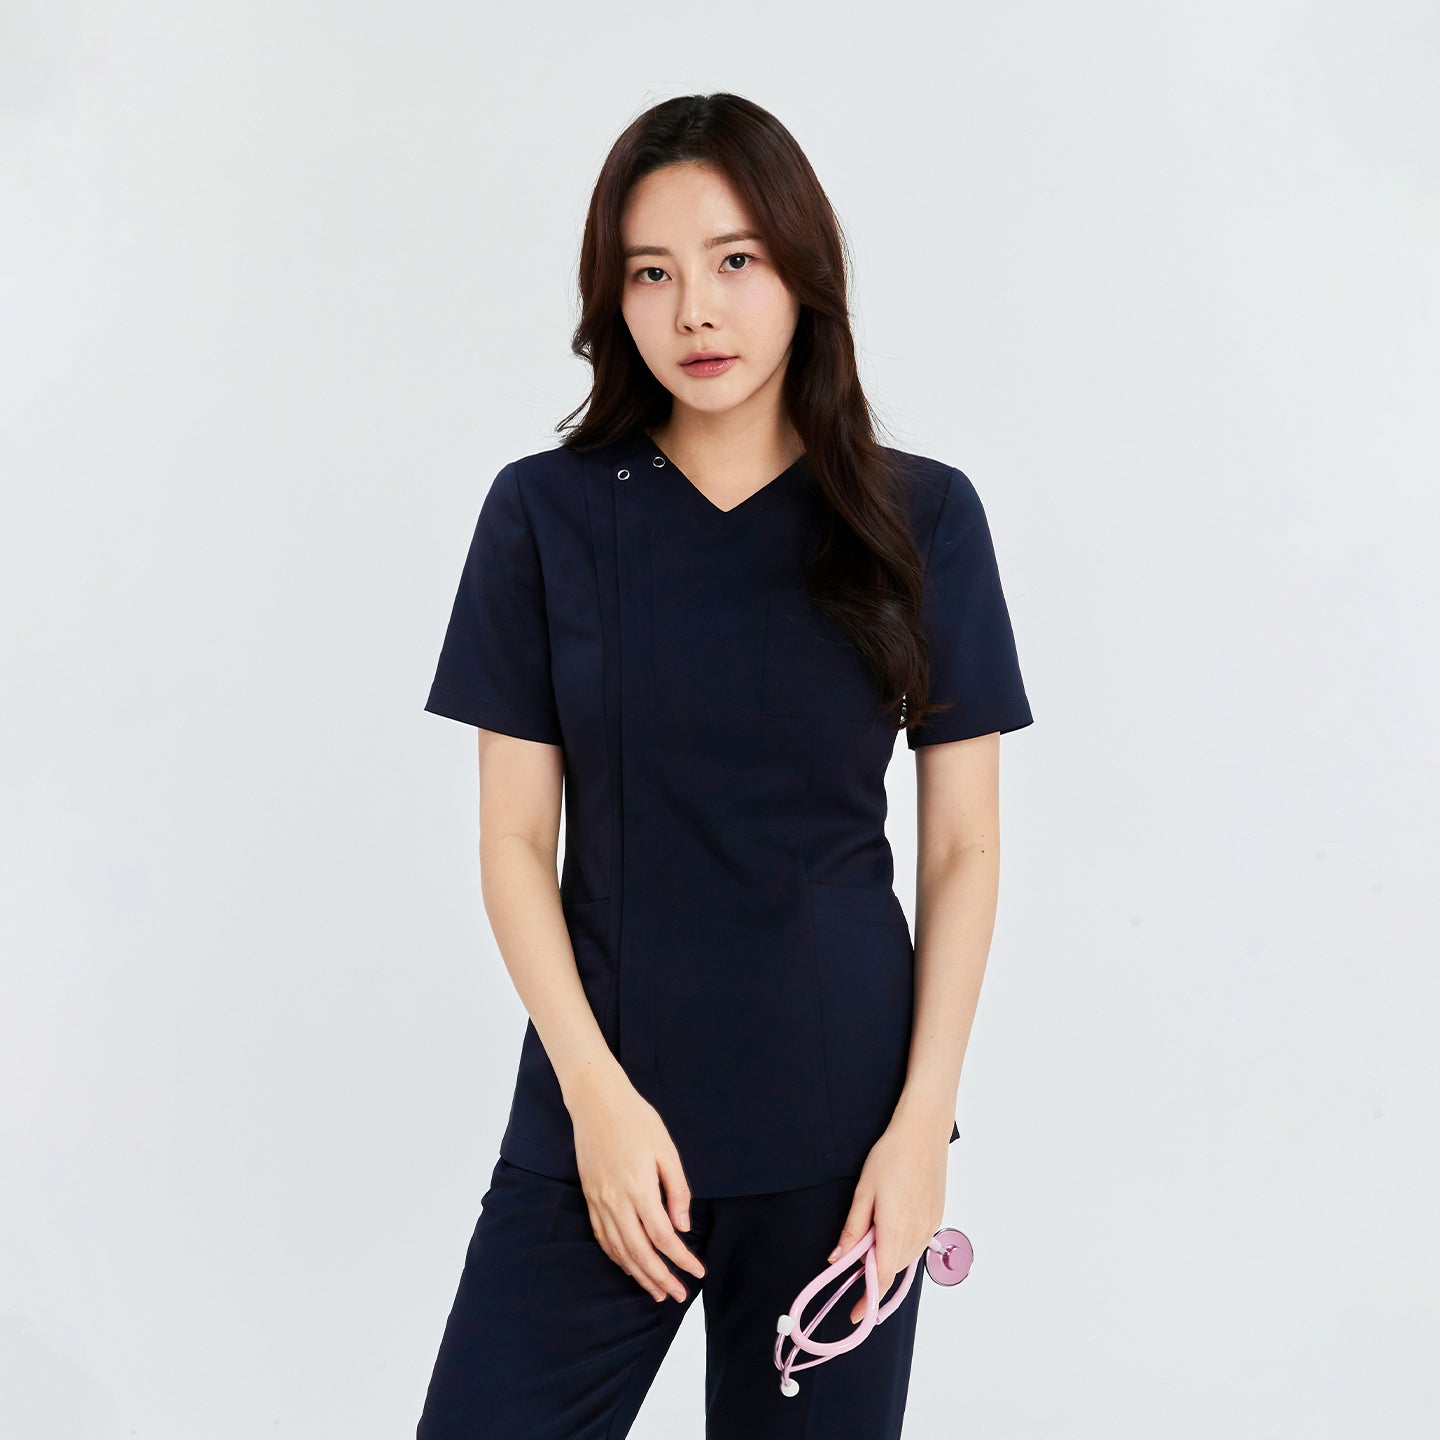  Woman wearing a navy front zipper scrub top with matching straight-leg pants, holding a pink stethoscope,Navy